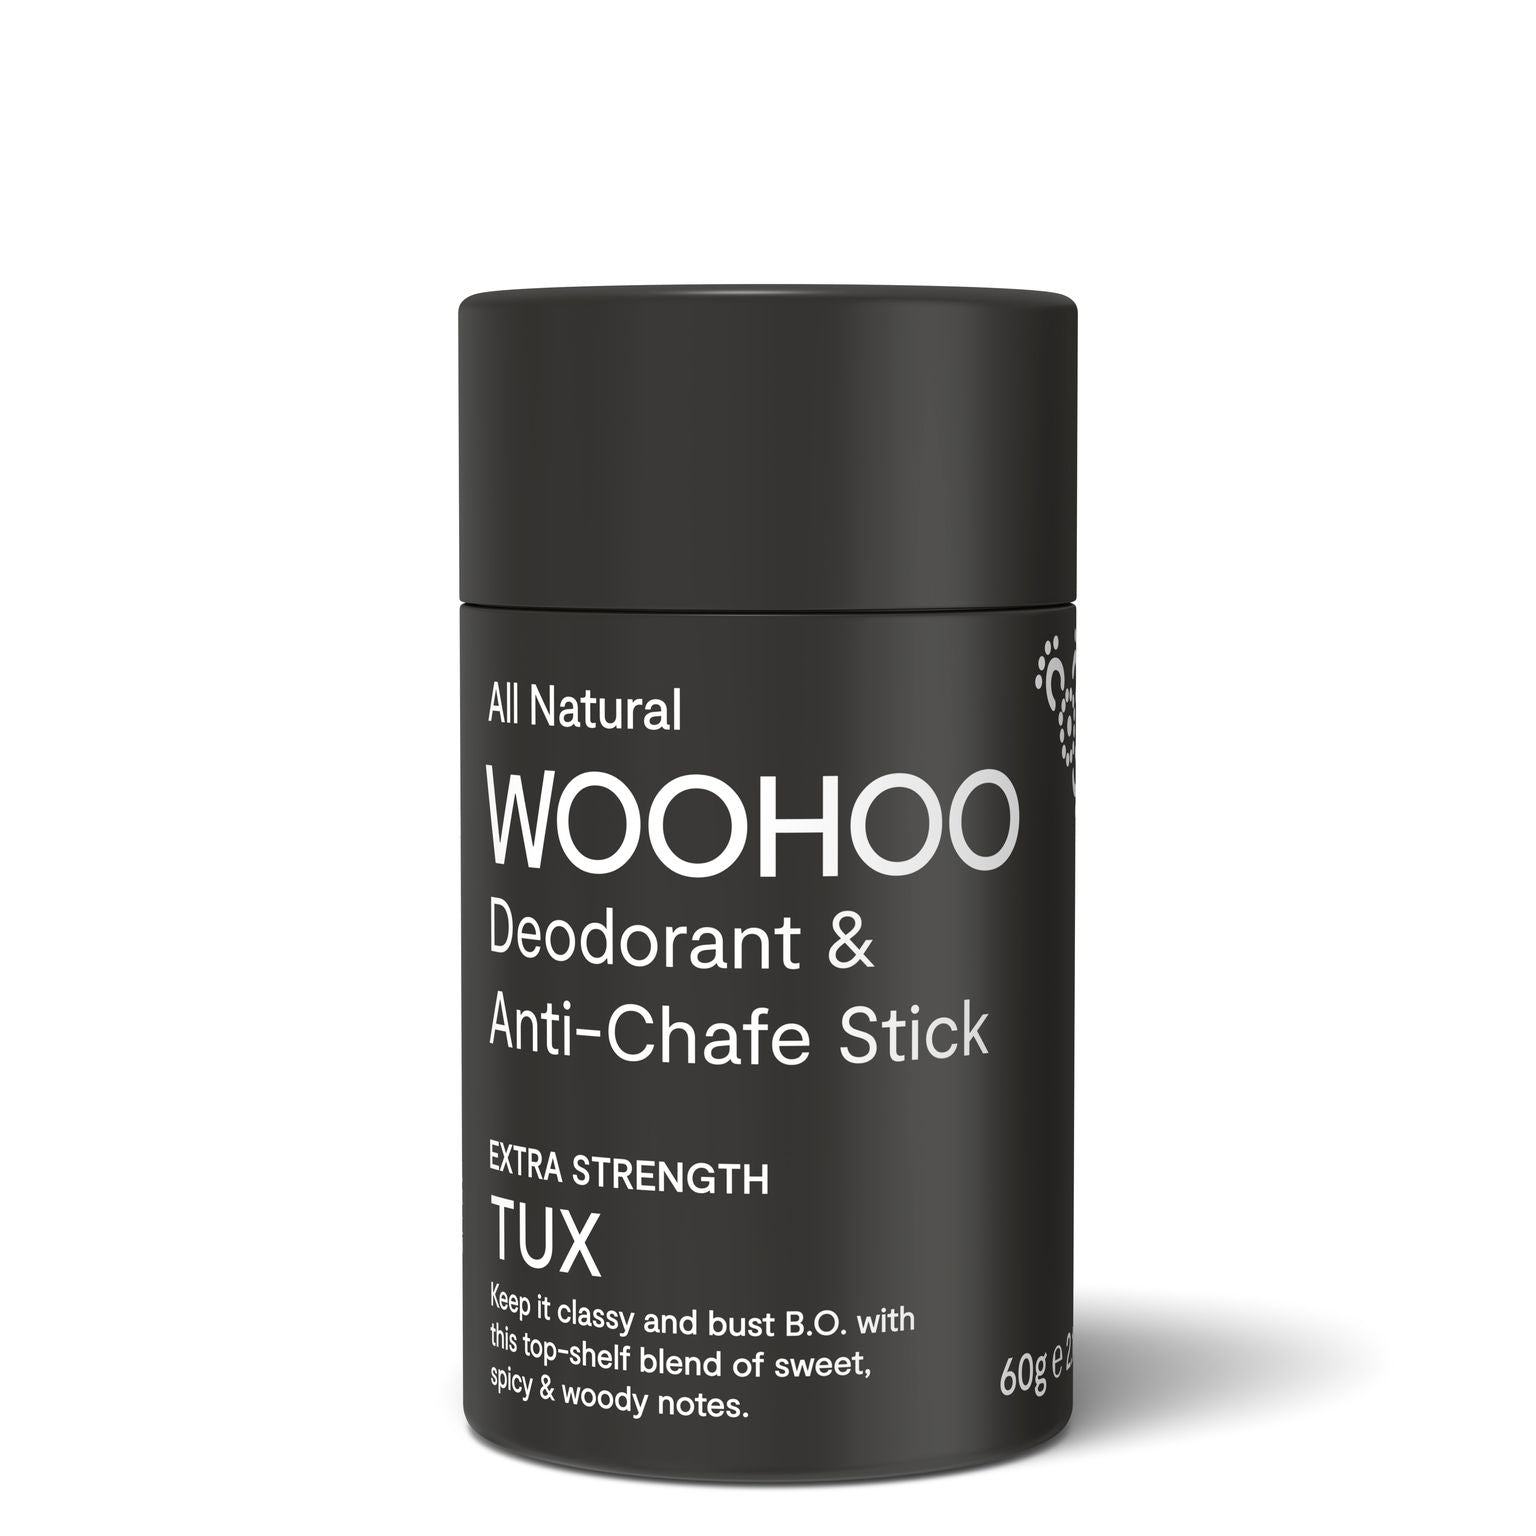 Woohoo Body! Natural Deodorant & Anti Chafe - Tux Extra Strong